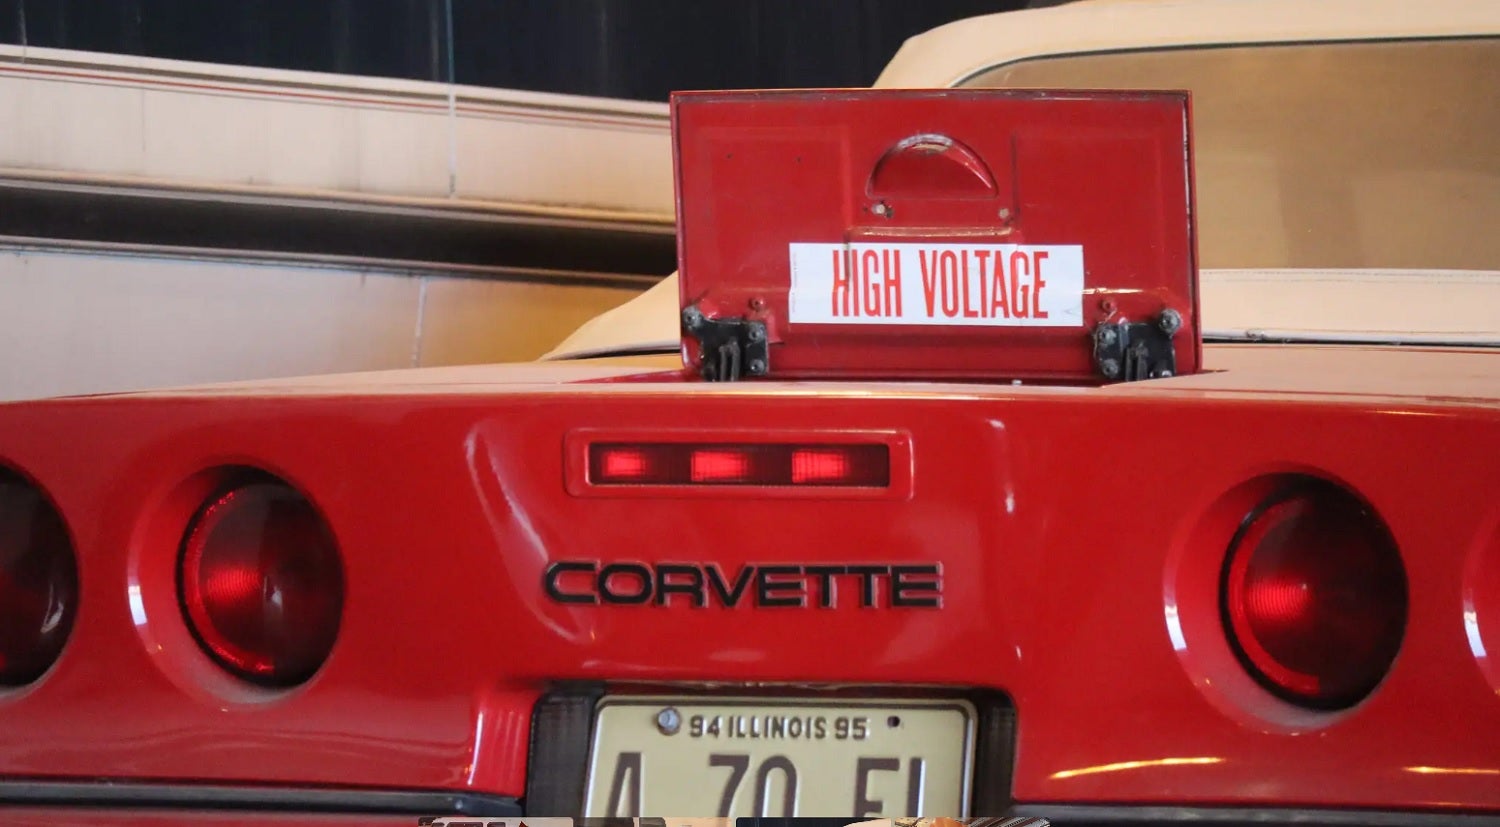 1978 electric Chevy Corvette in red with back charger cover that says "high voltage"